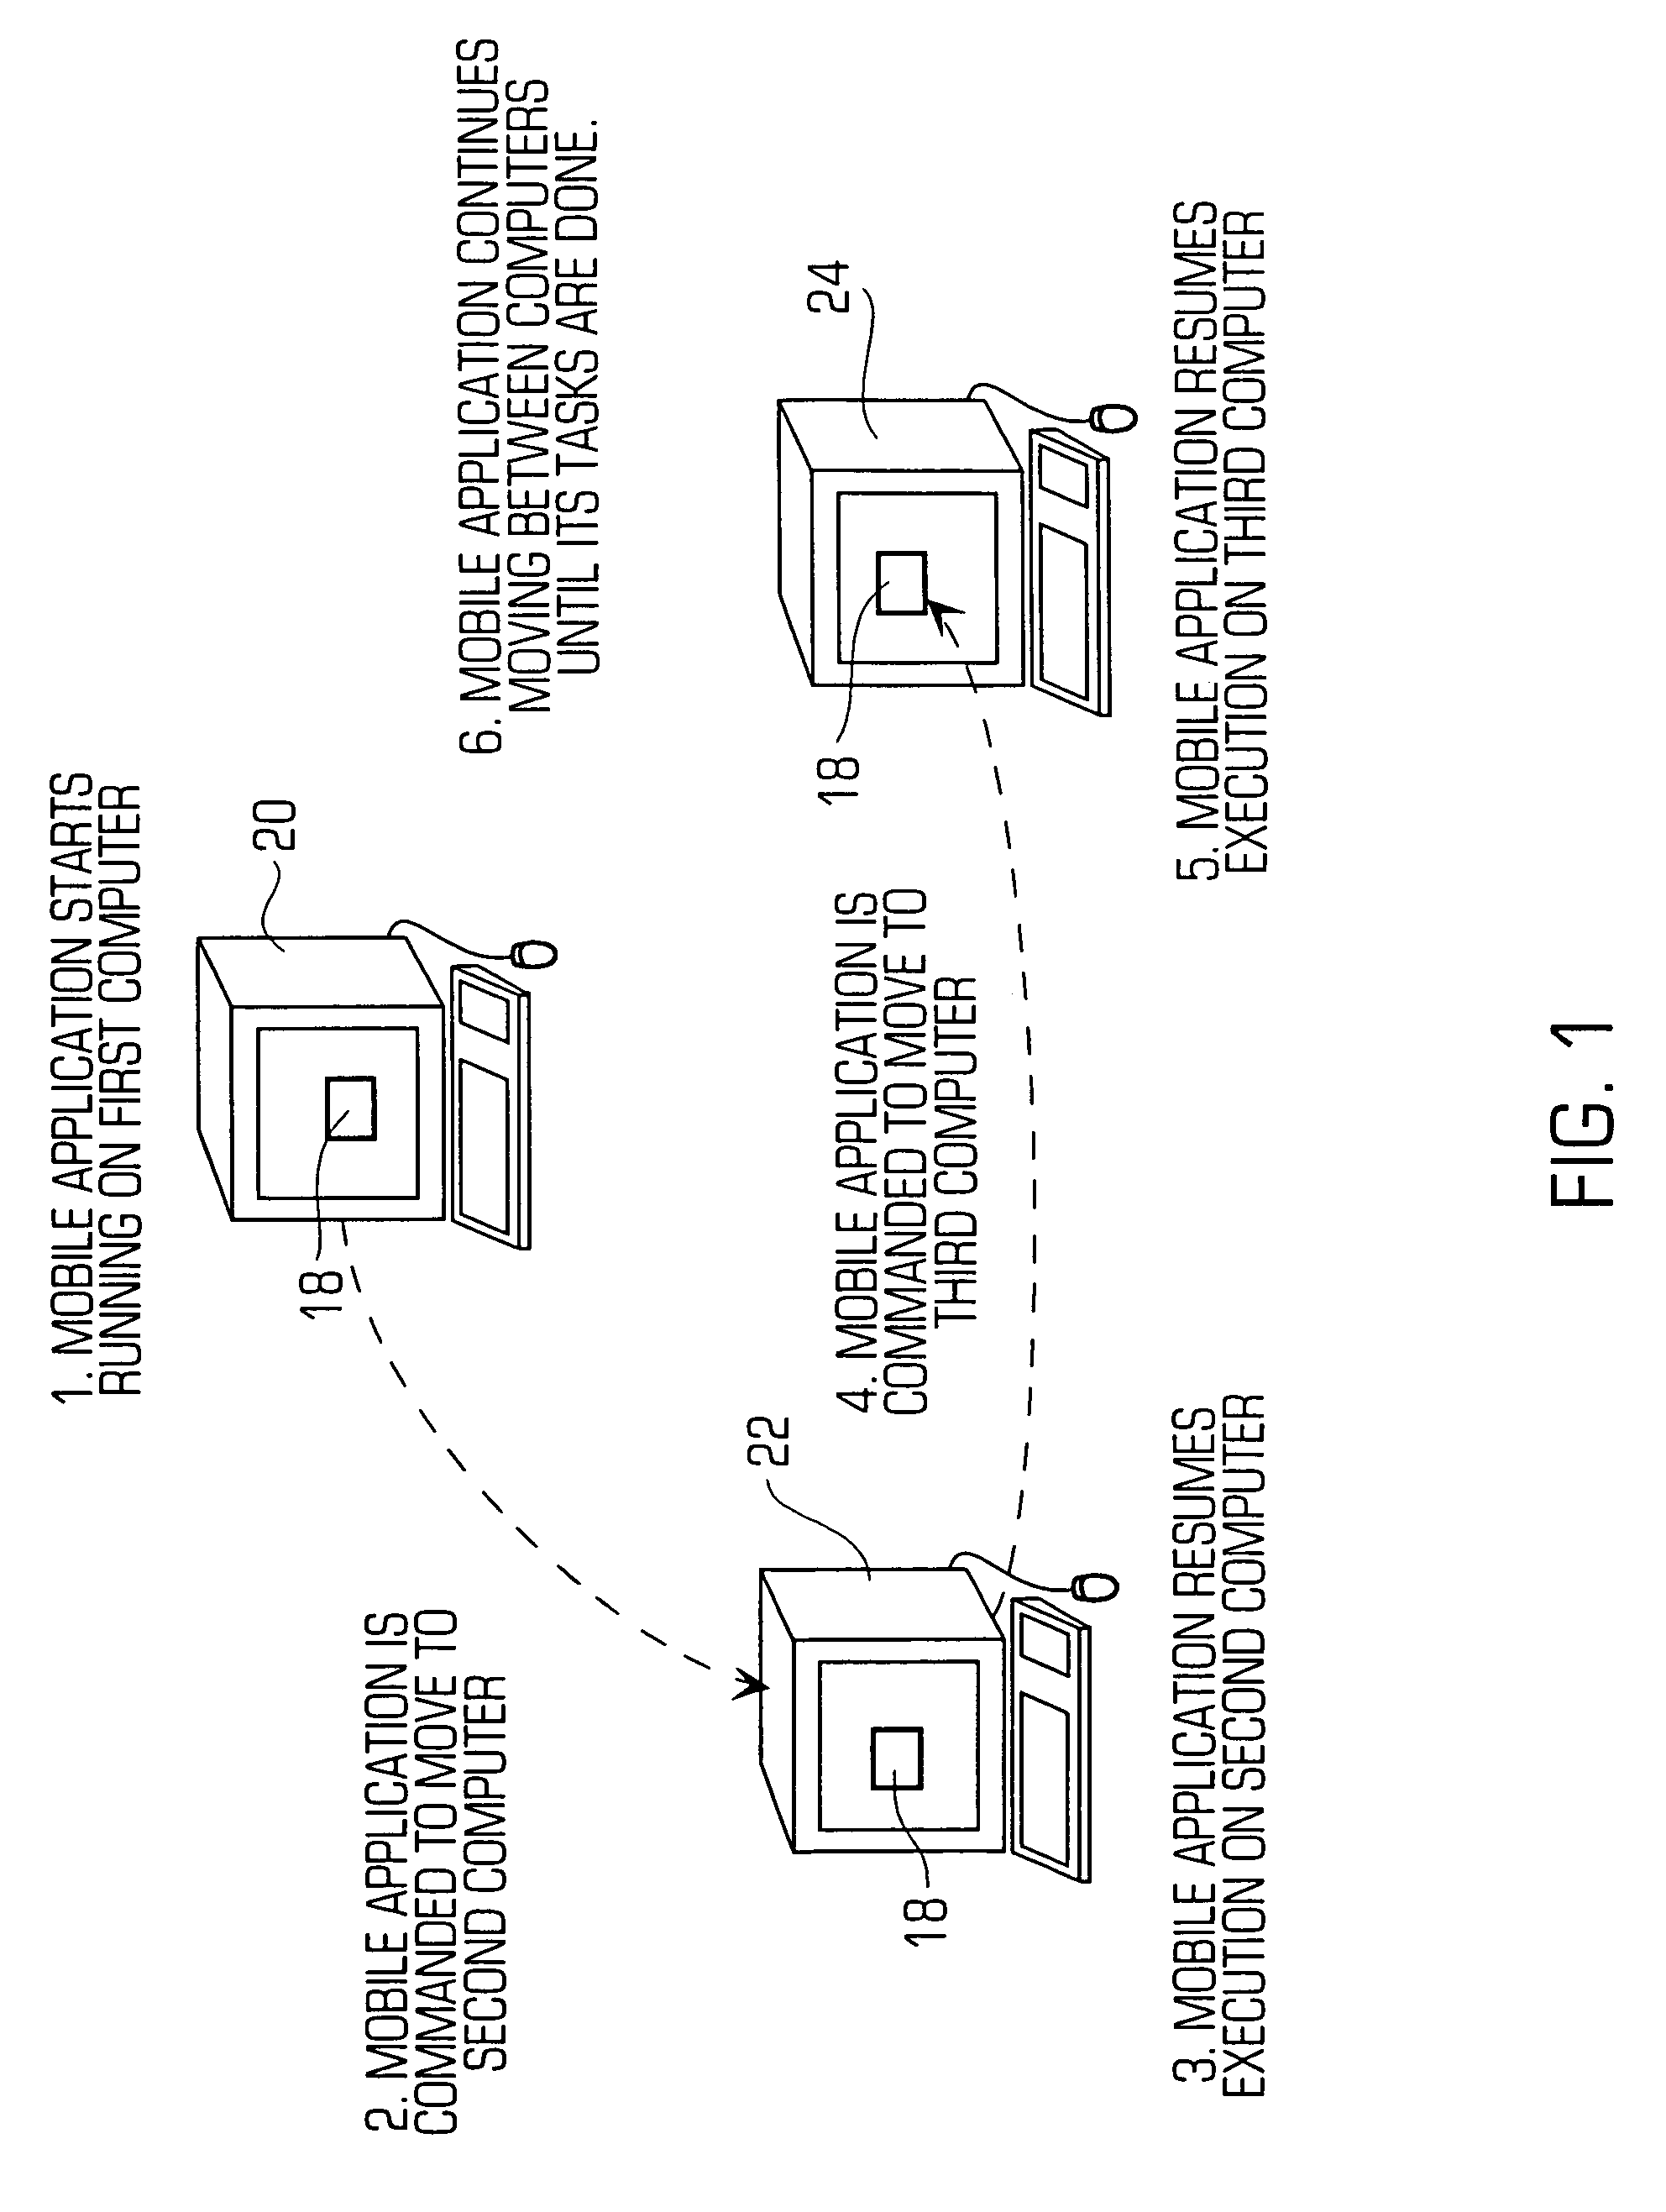 Mobile application peer-to-peer security system and method